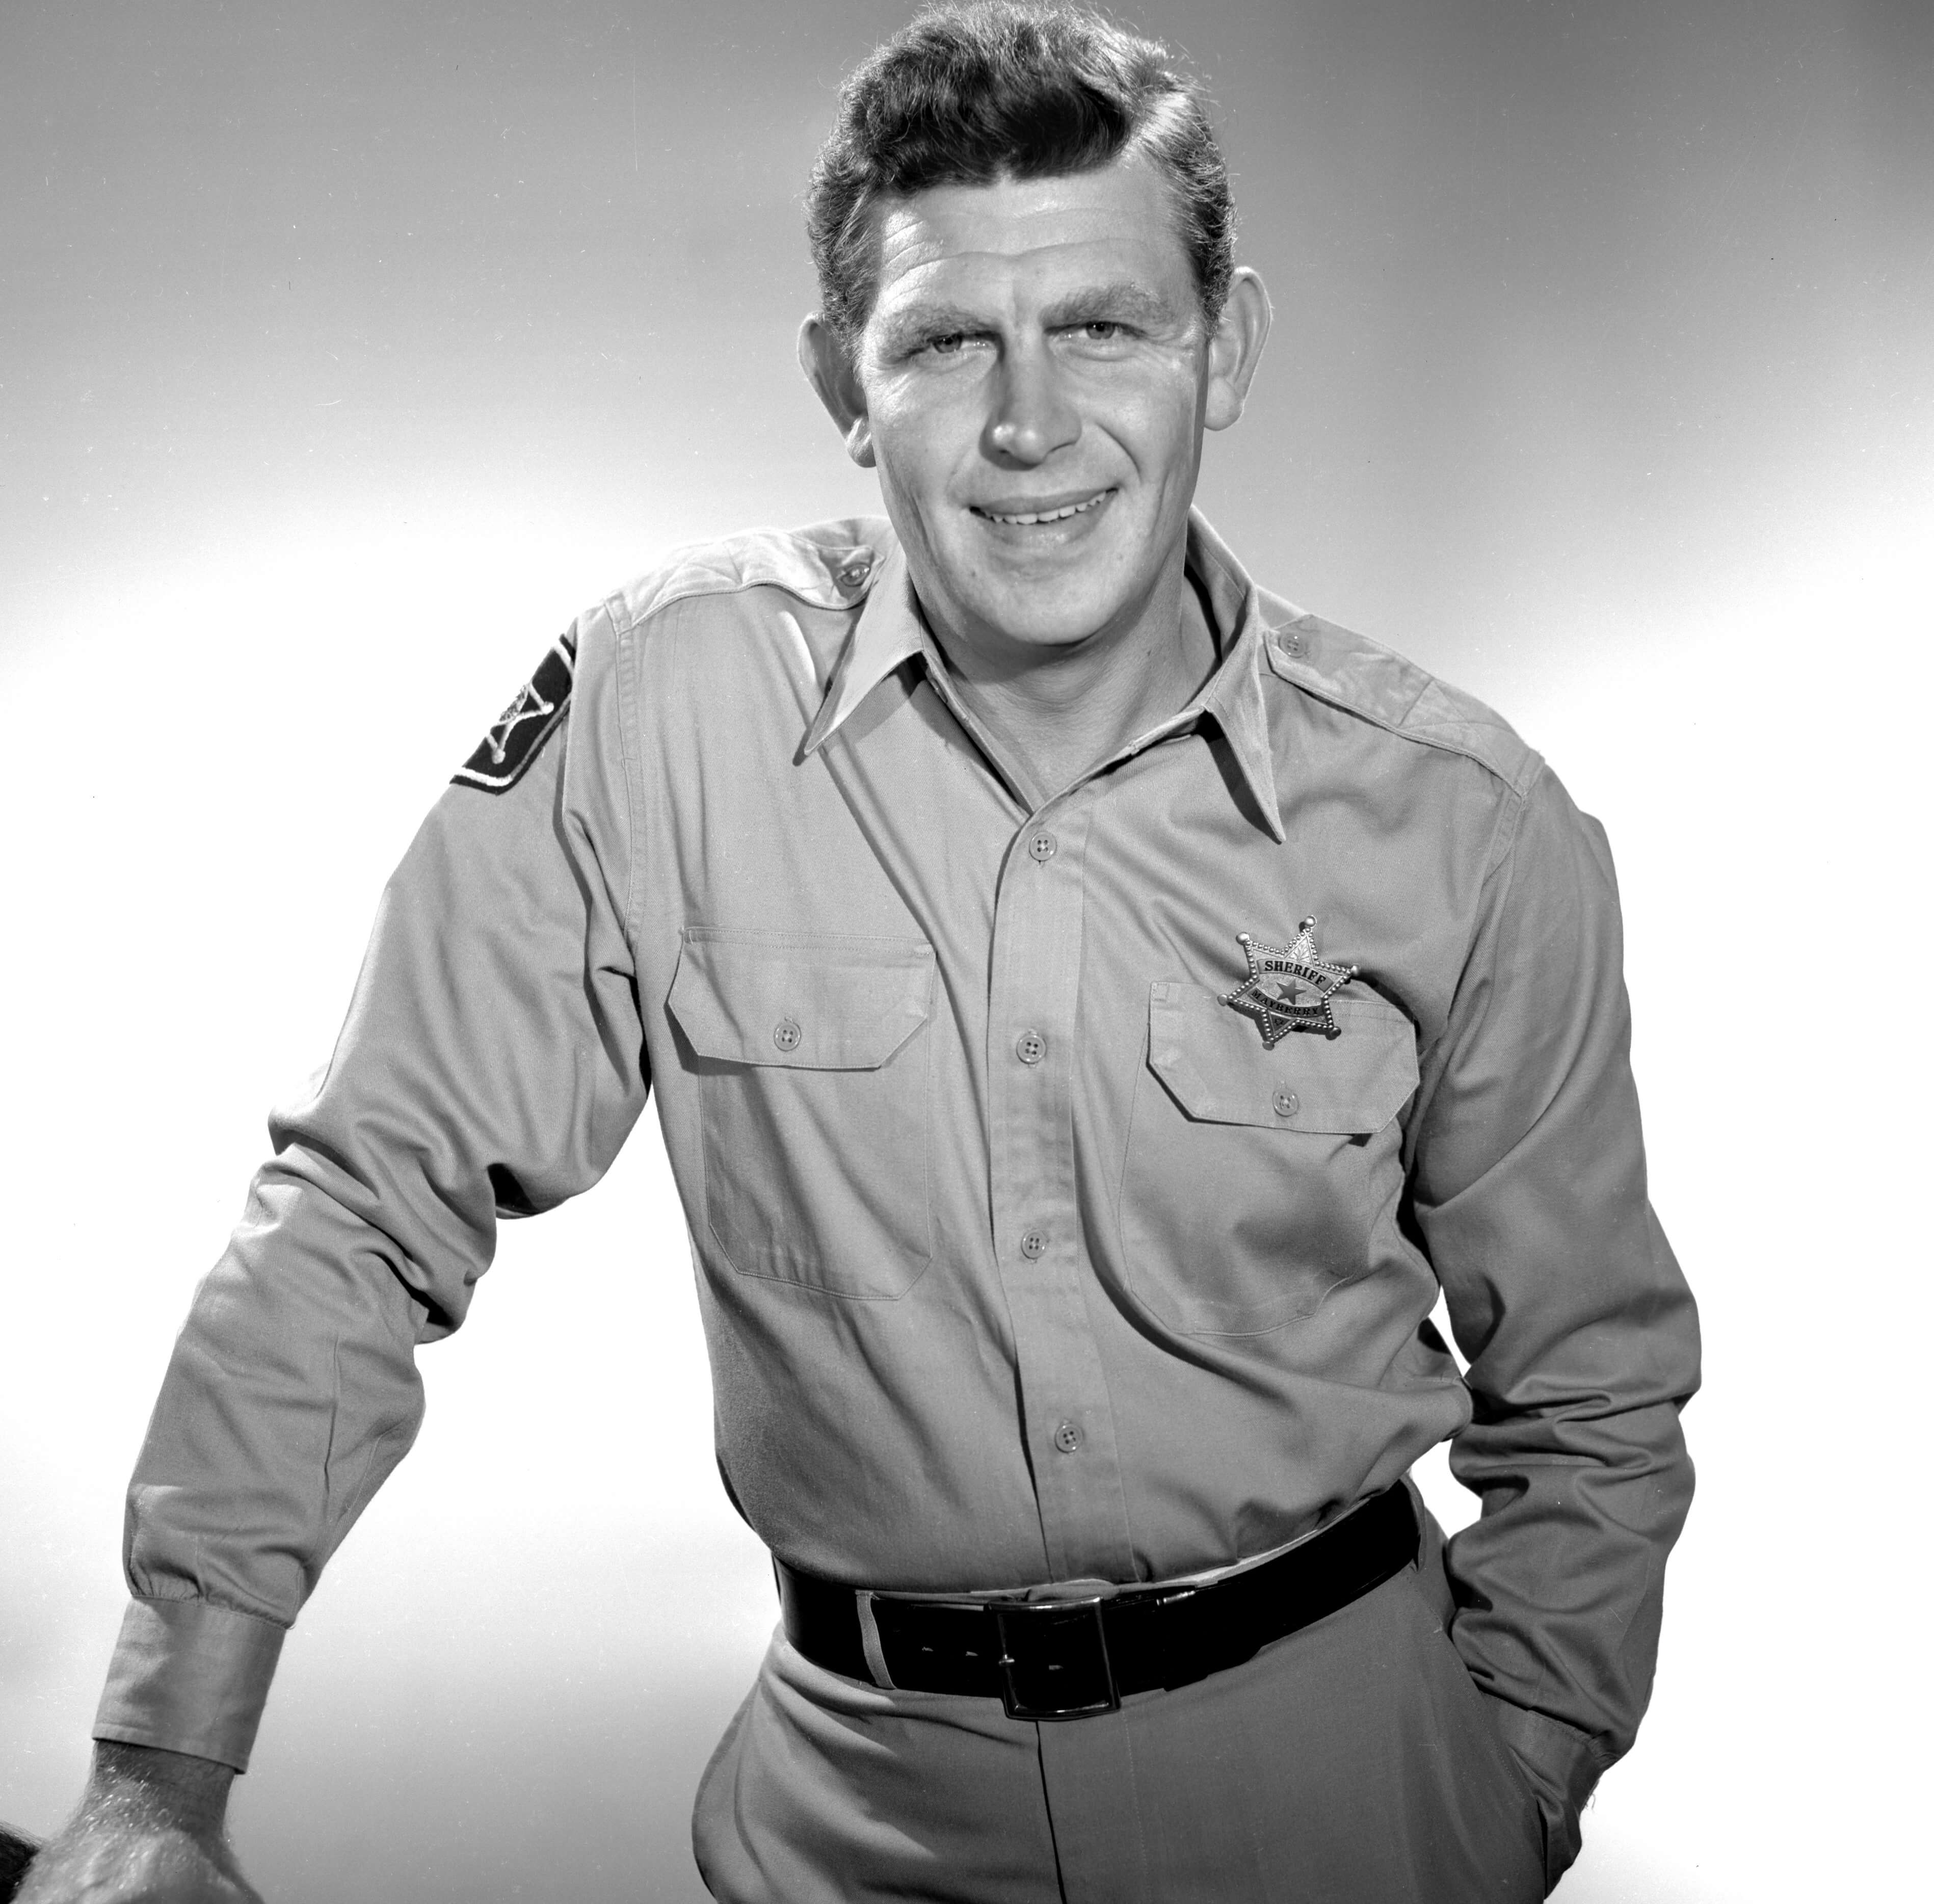 Andy Griffith dressed as his character from 'The Andy Griffith Show'